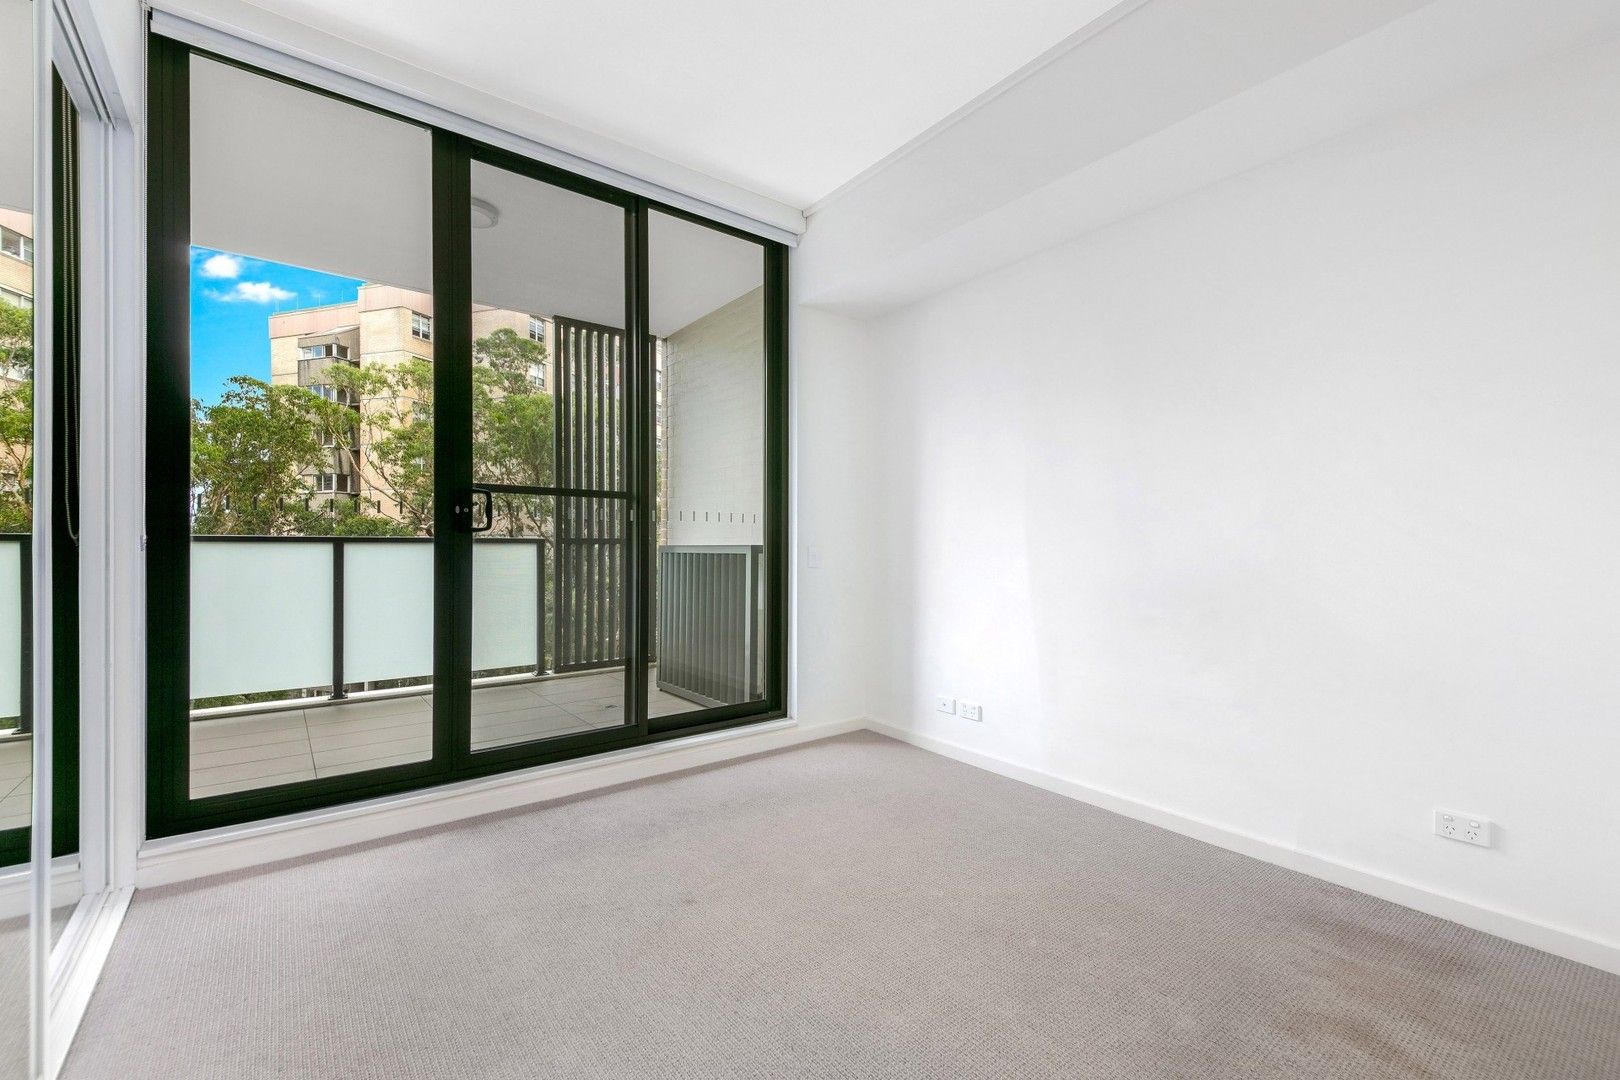 1 bedrooms Apartment / Unit / Flat in 504/7 Washington Ave RIVERWOOD NSW, 2210